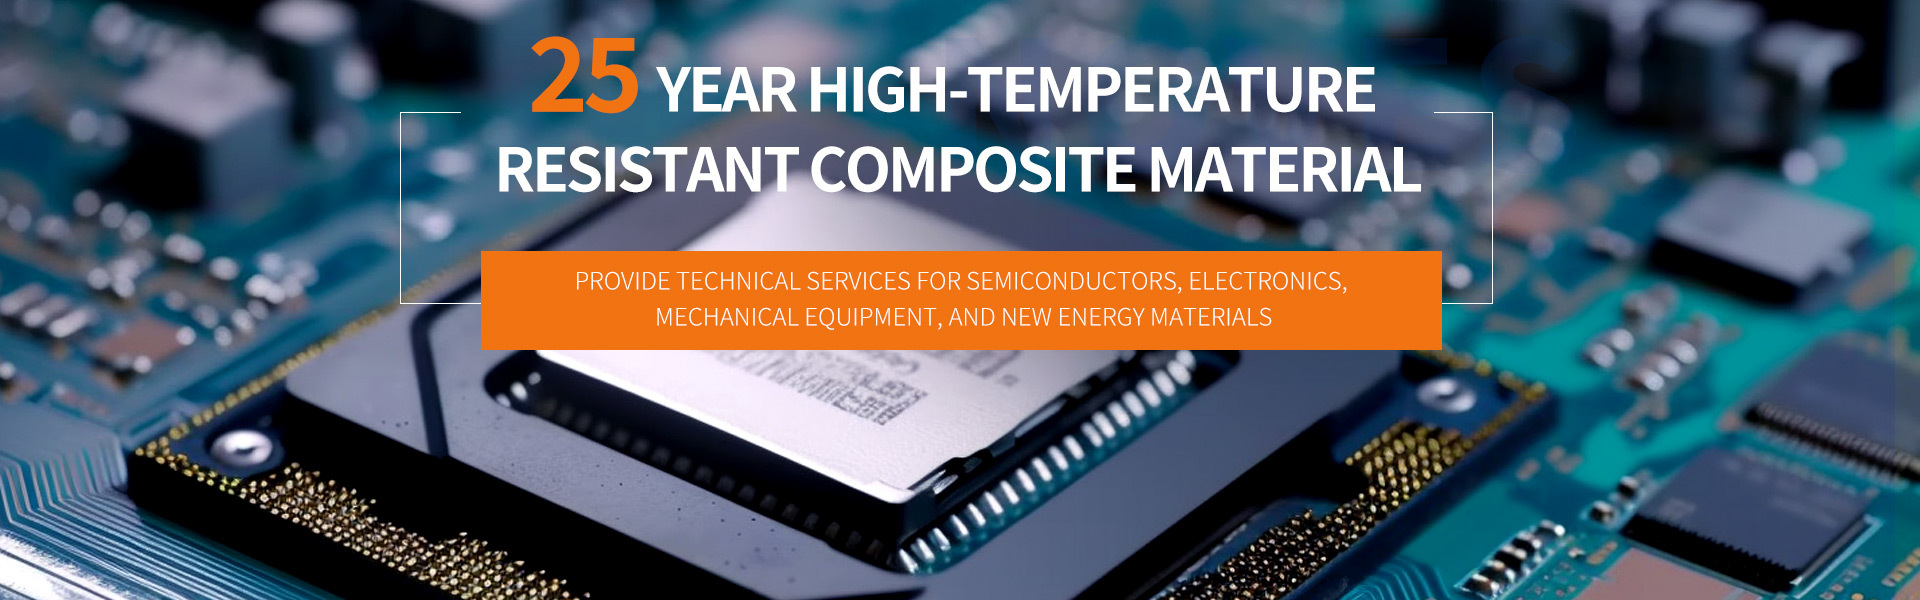 A one-stop solution provider for high-performance composite materials